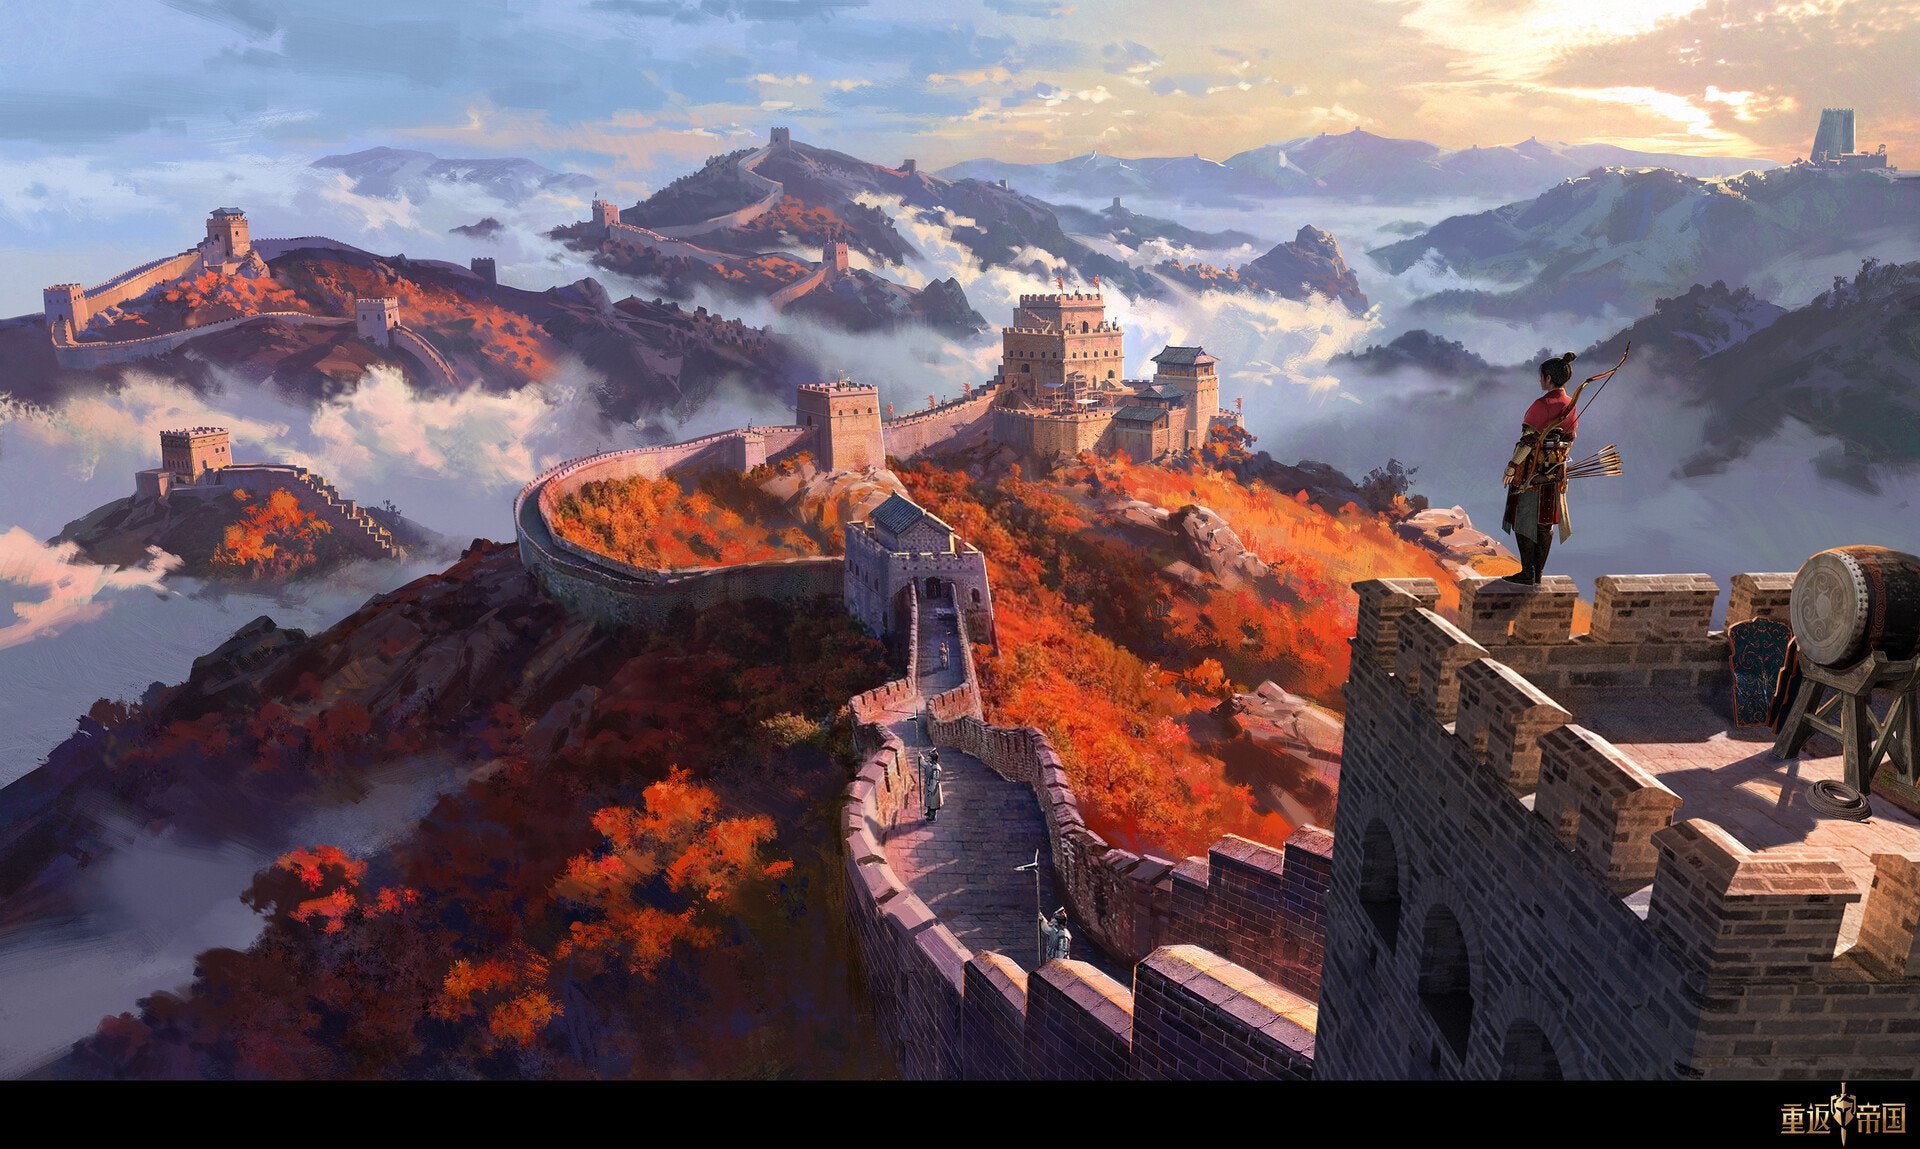 The Great Wall by Ling Xiang